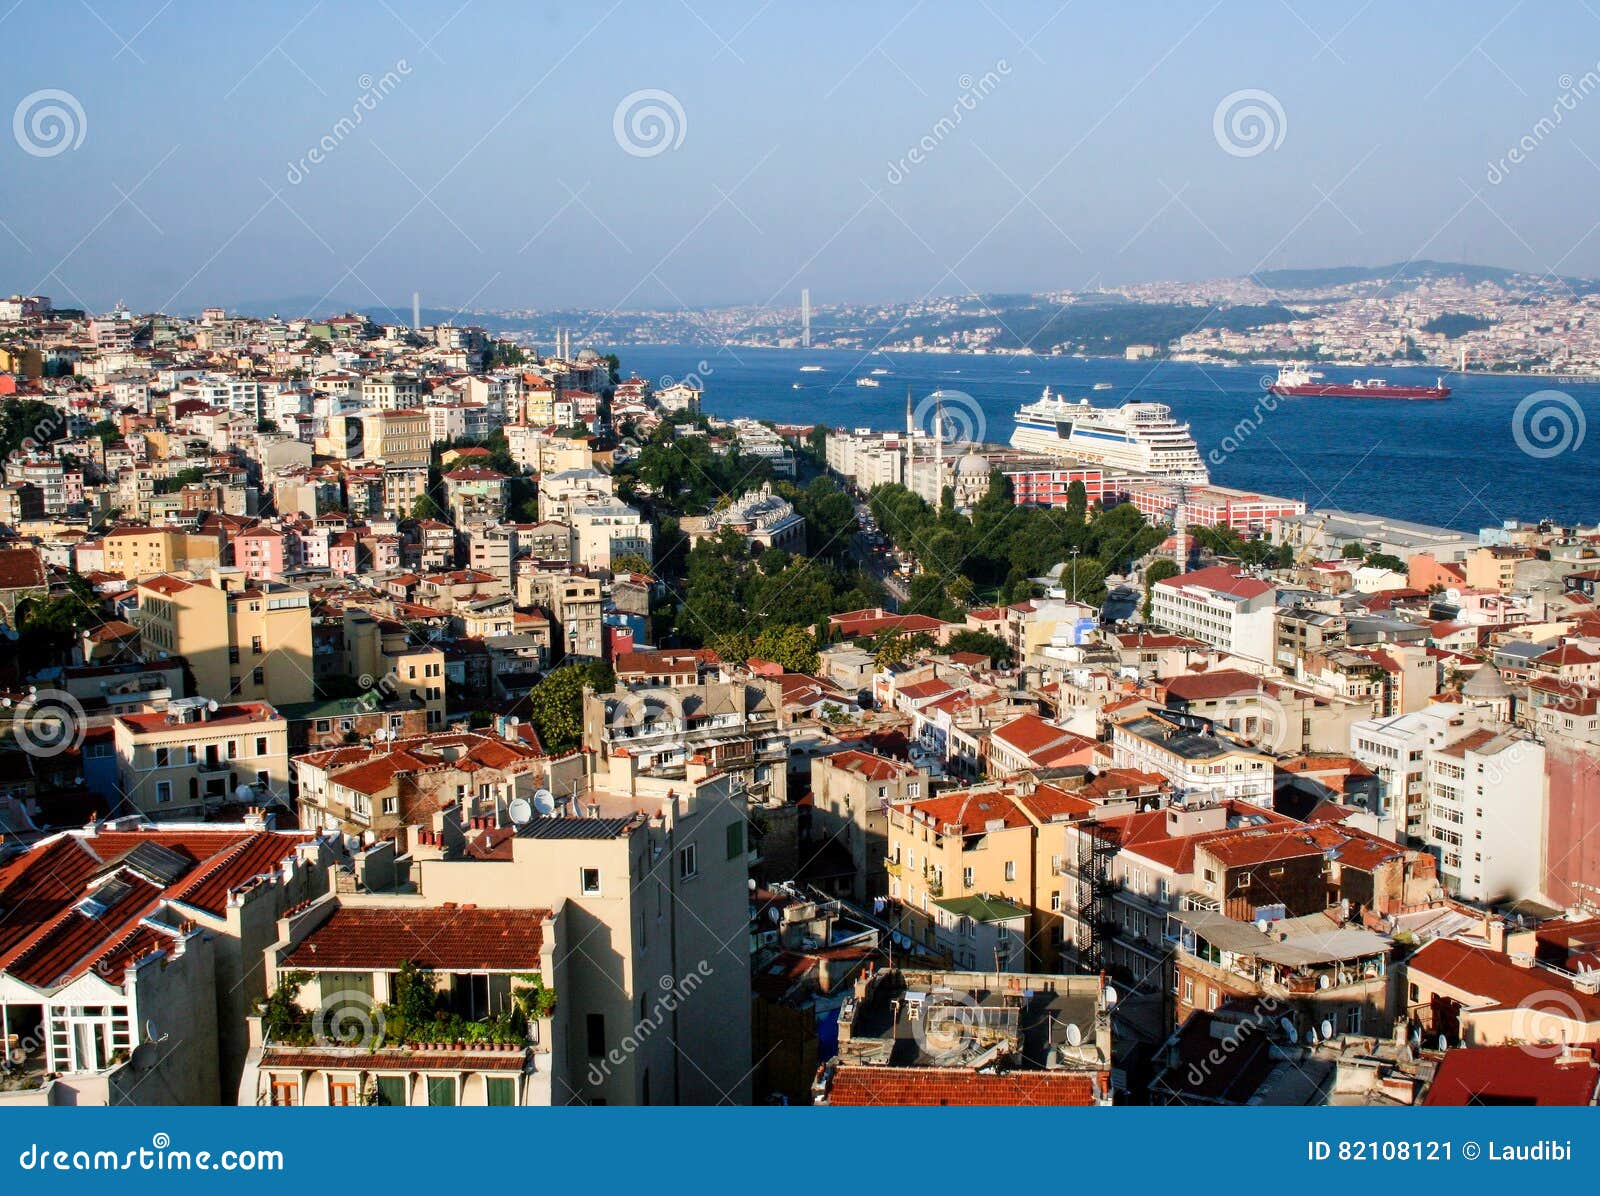 cityscape of istanbul